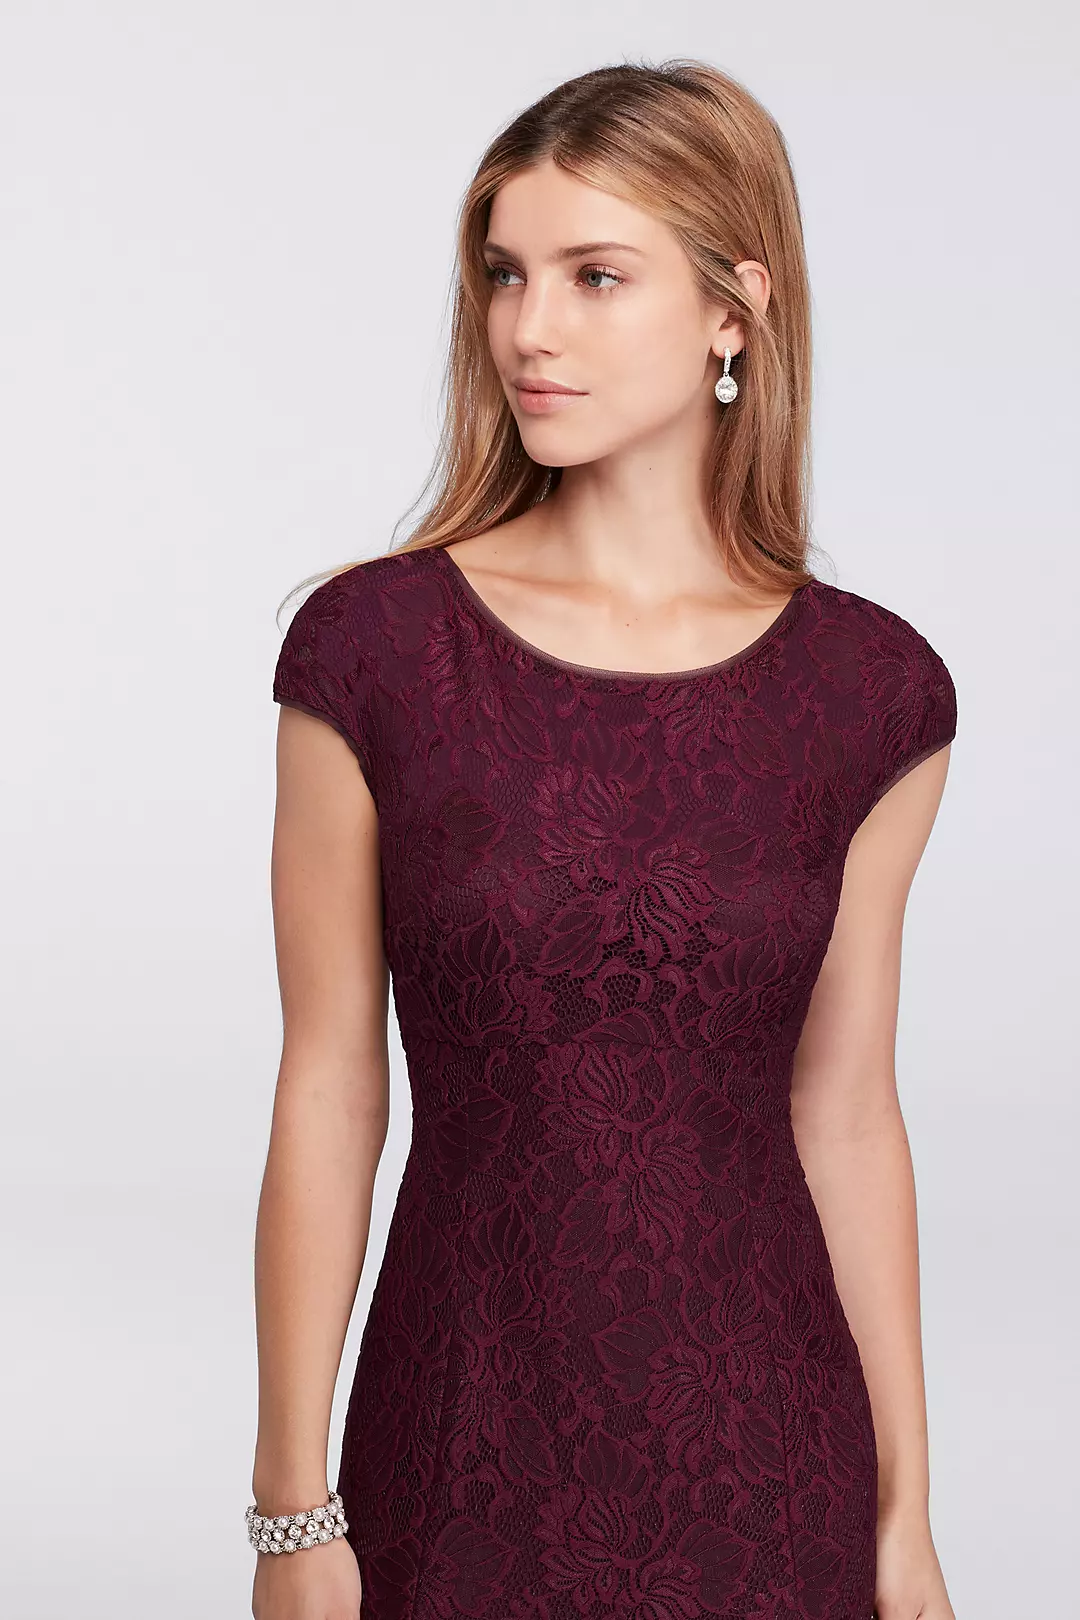 Long Cap-Sleeve Lace Dress with Low Back Image 3